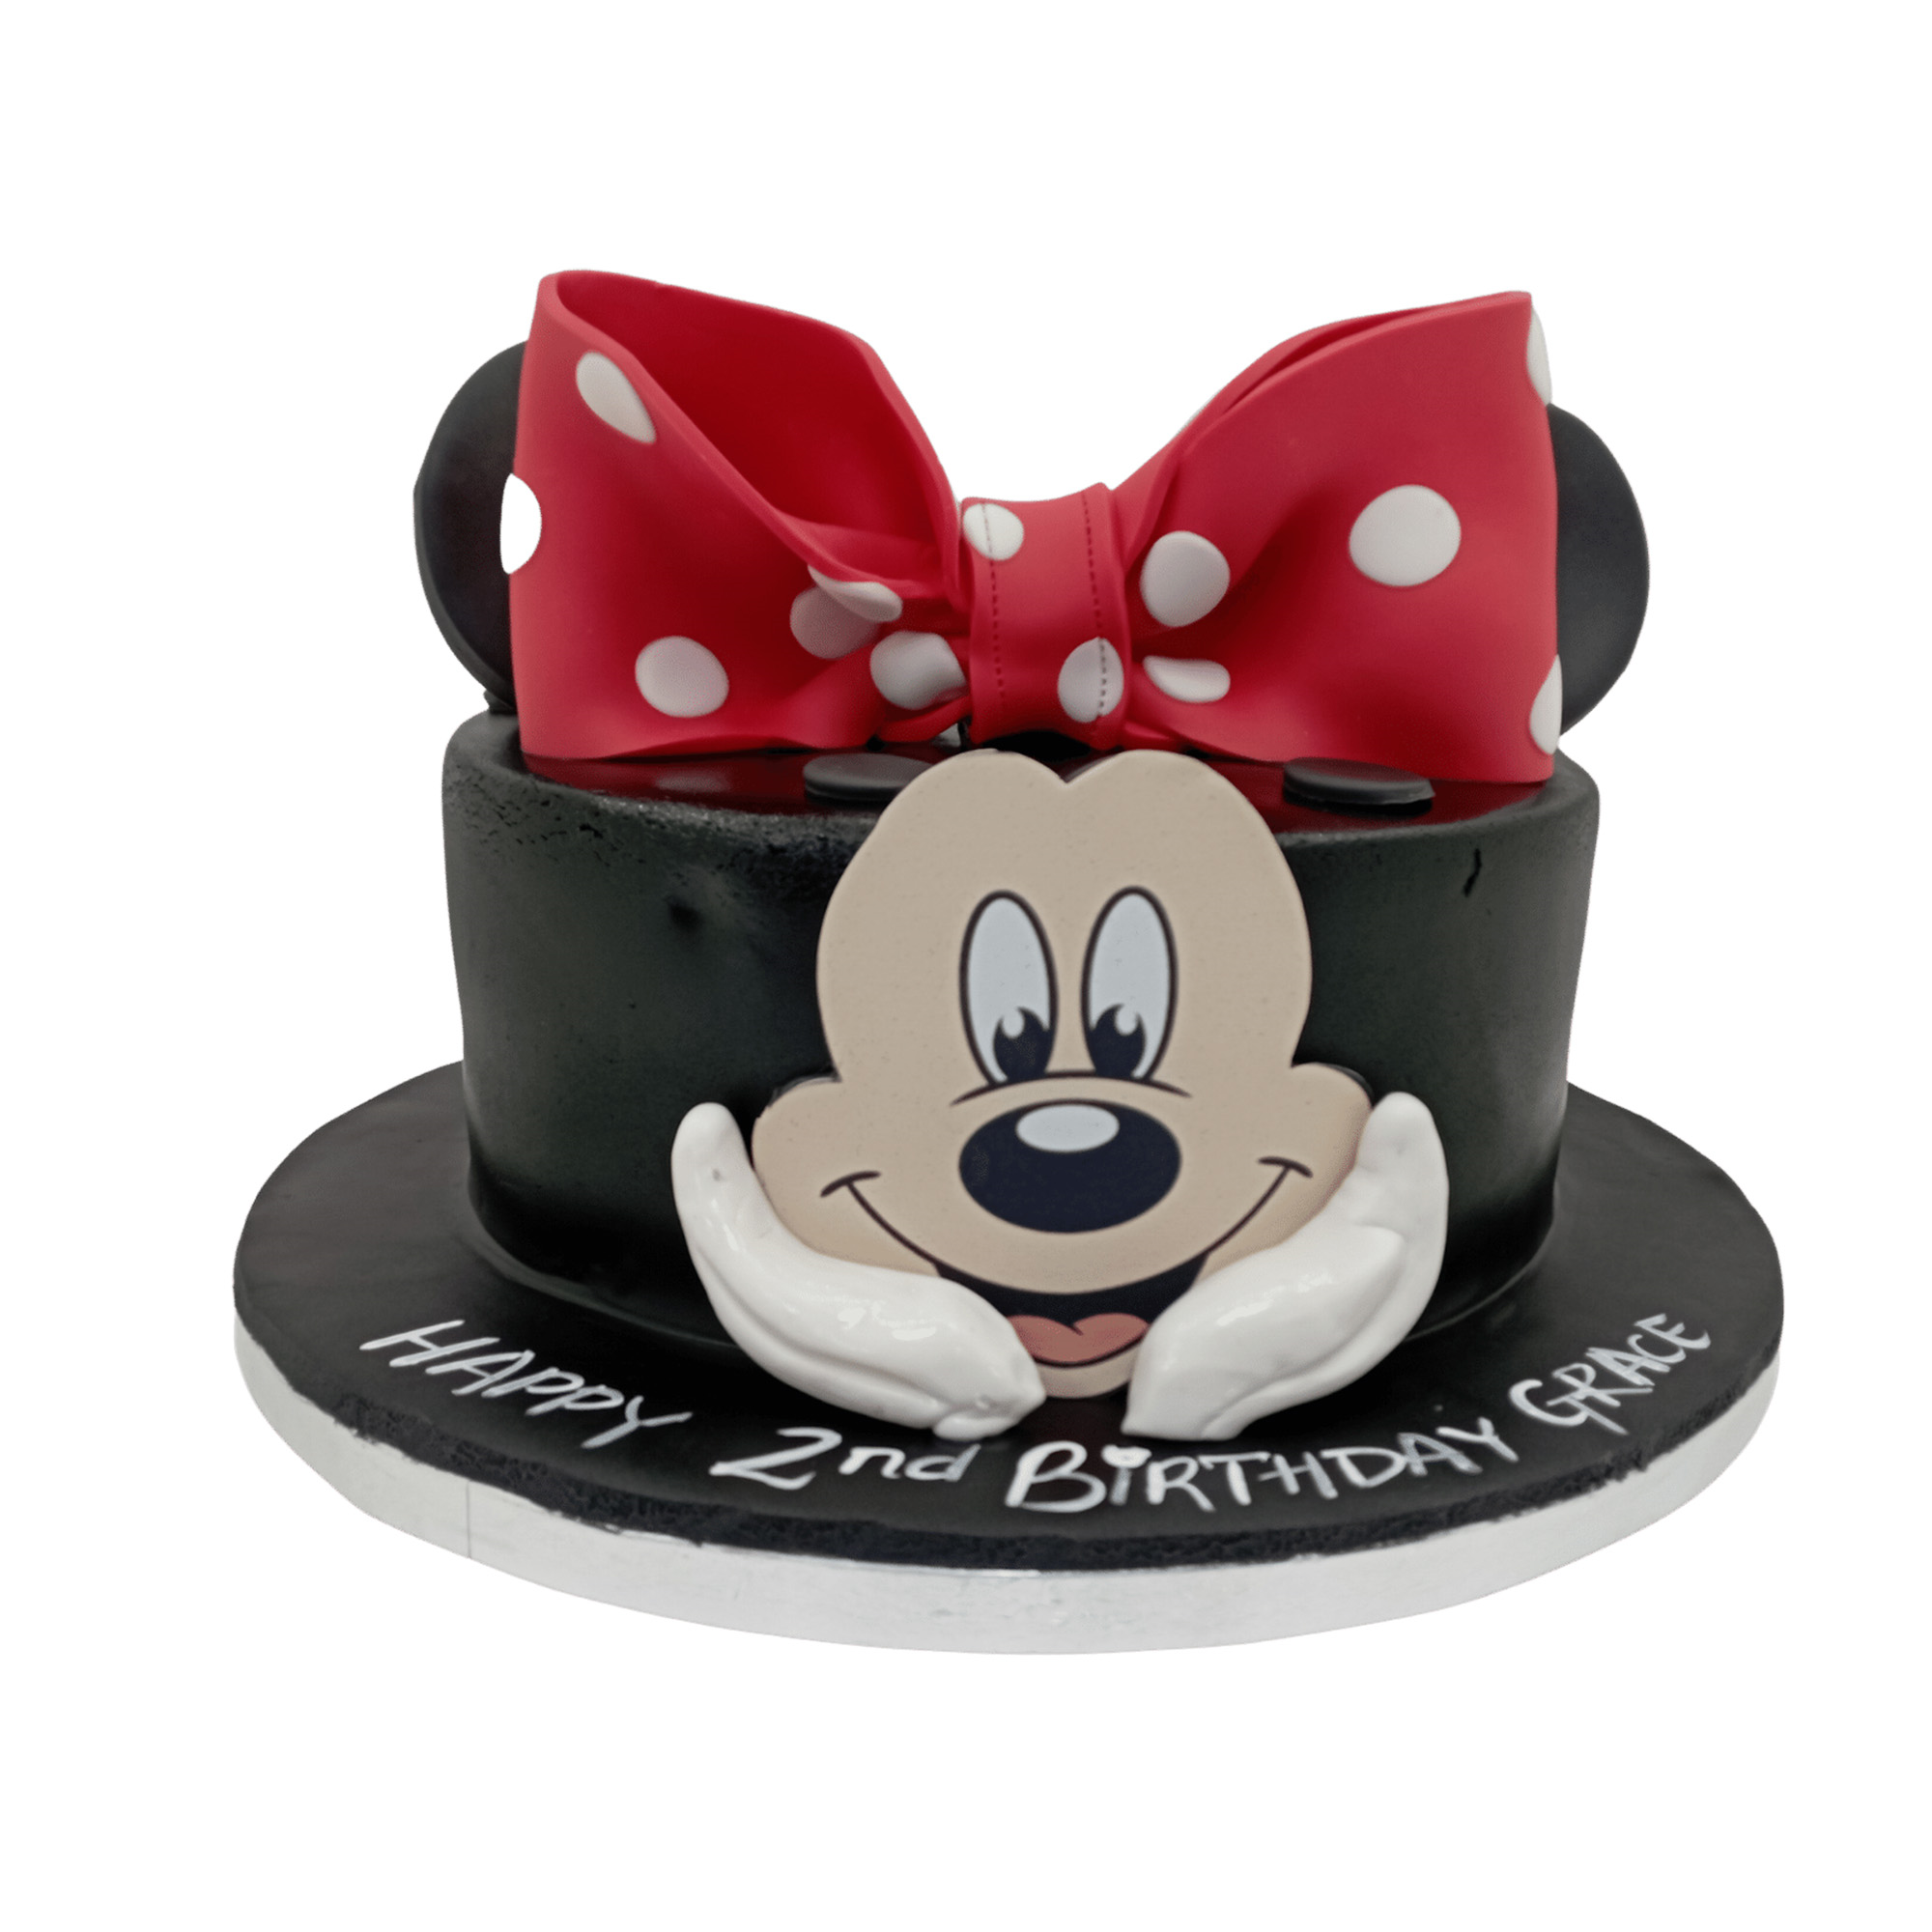 Minnie Mouse Birthday Cake for Kids